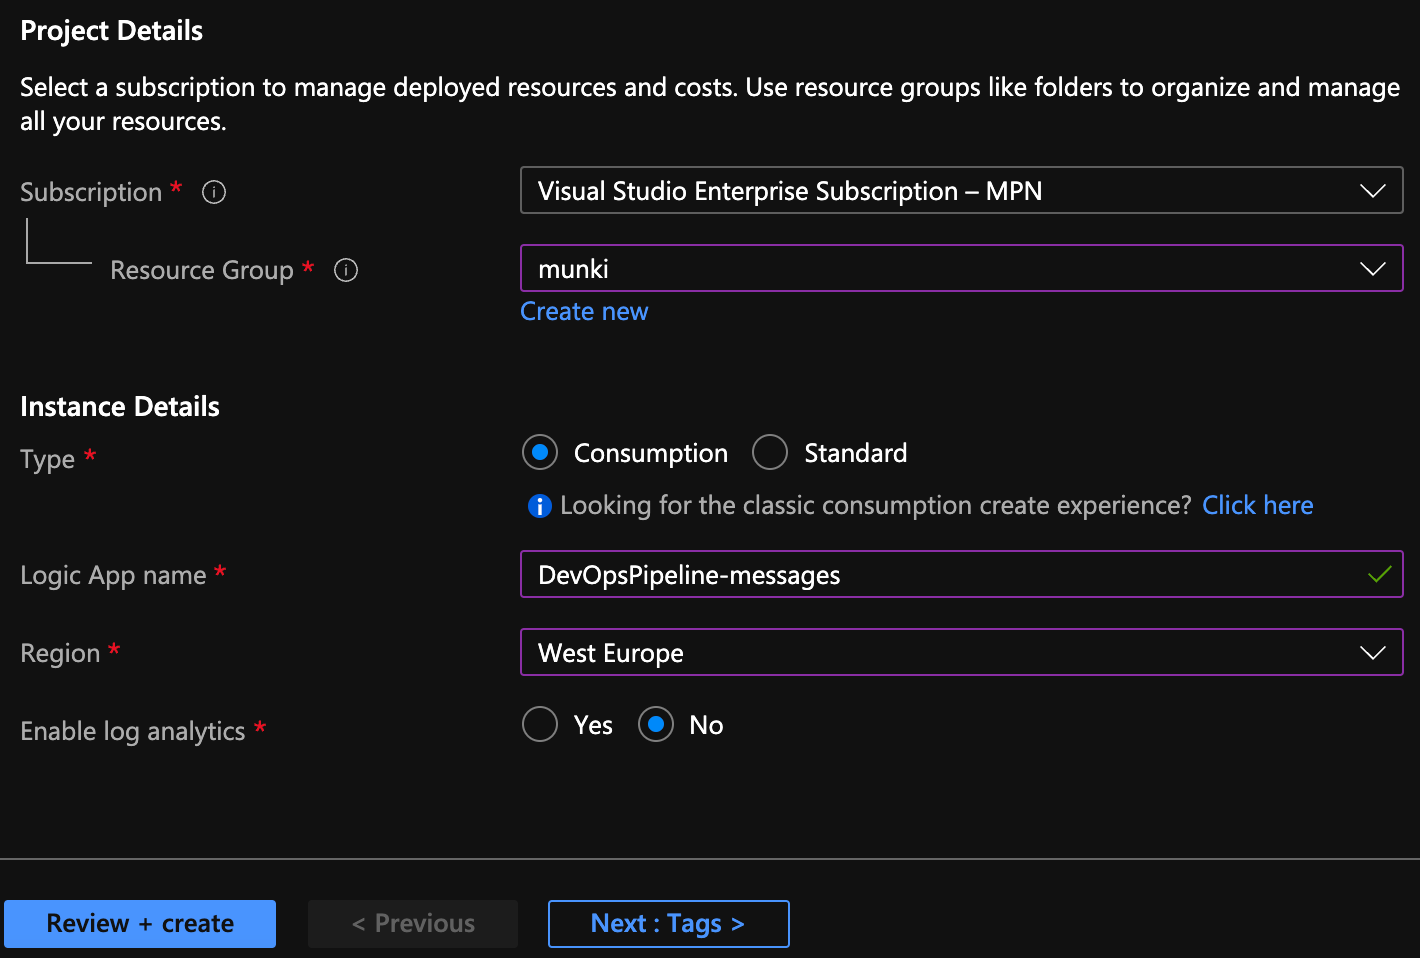 Secure messages to Teams with Azure Logic App